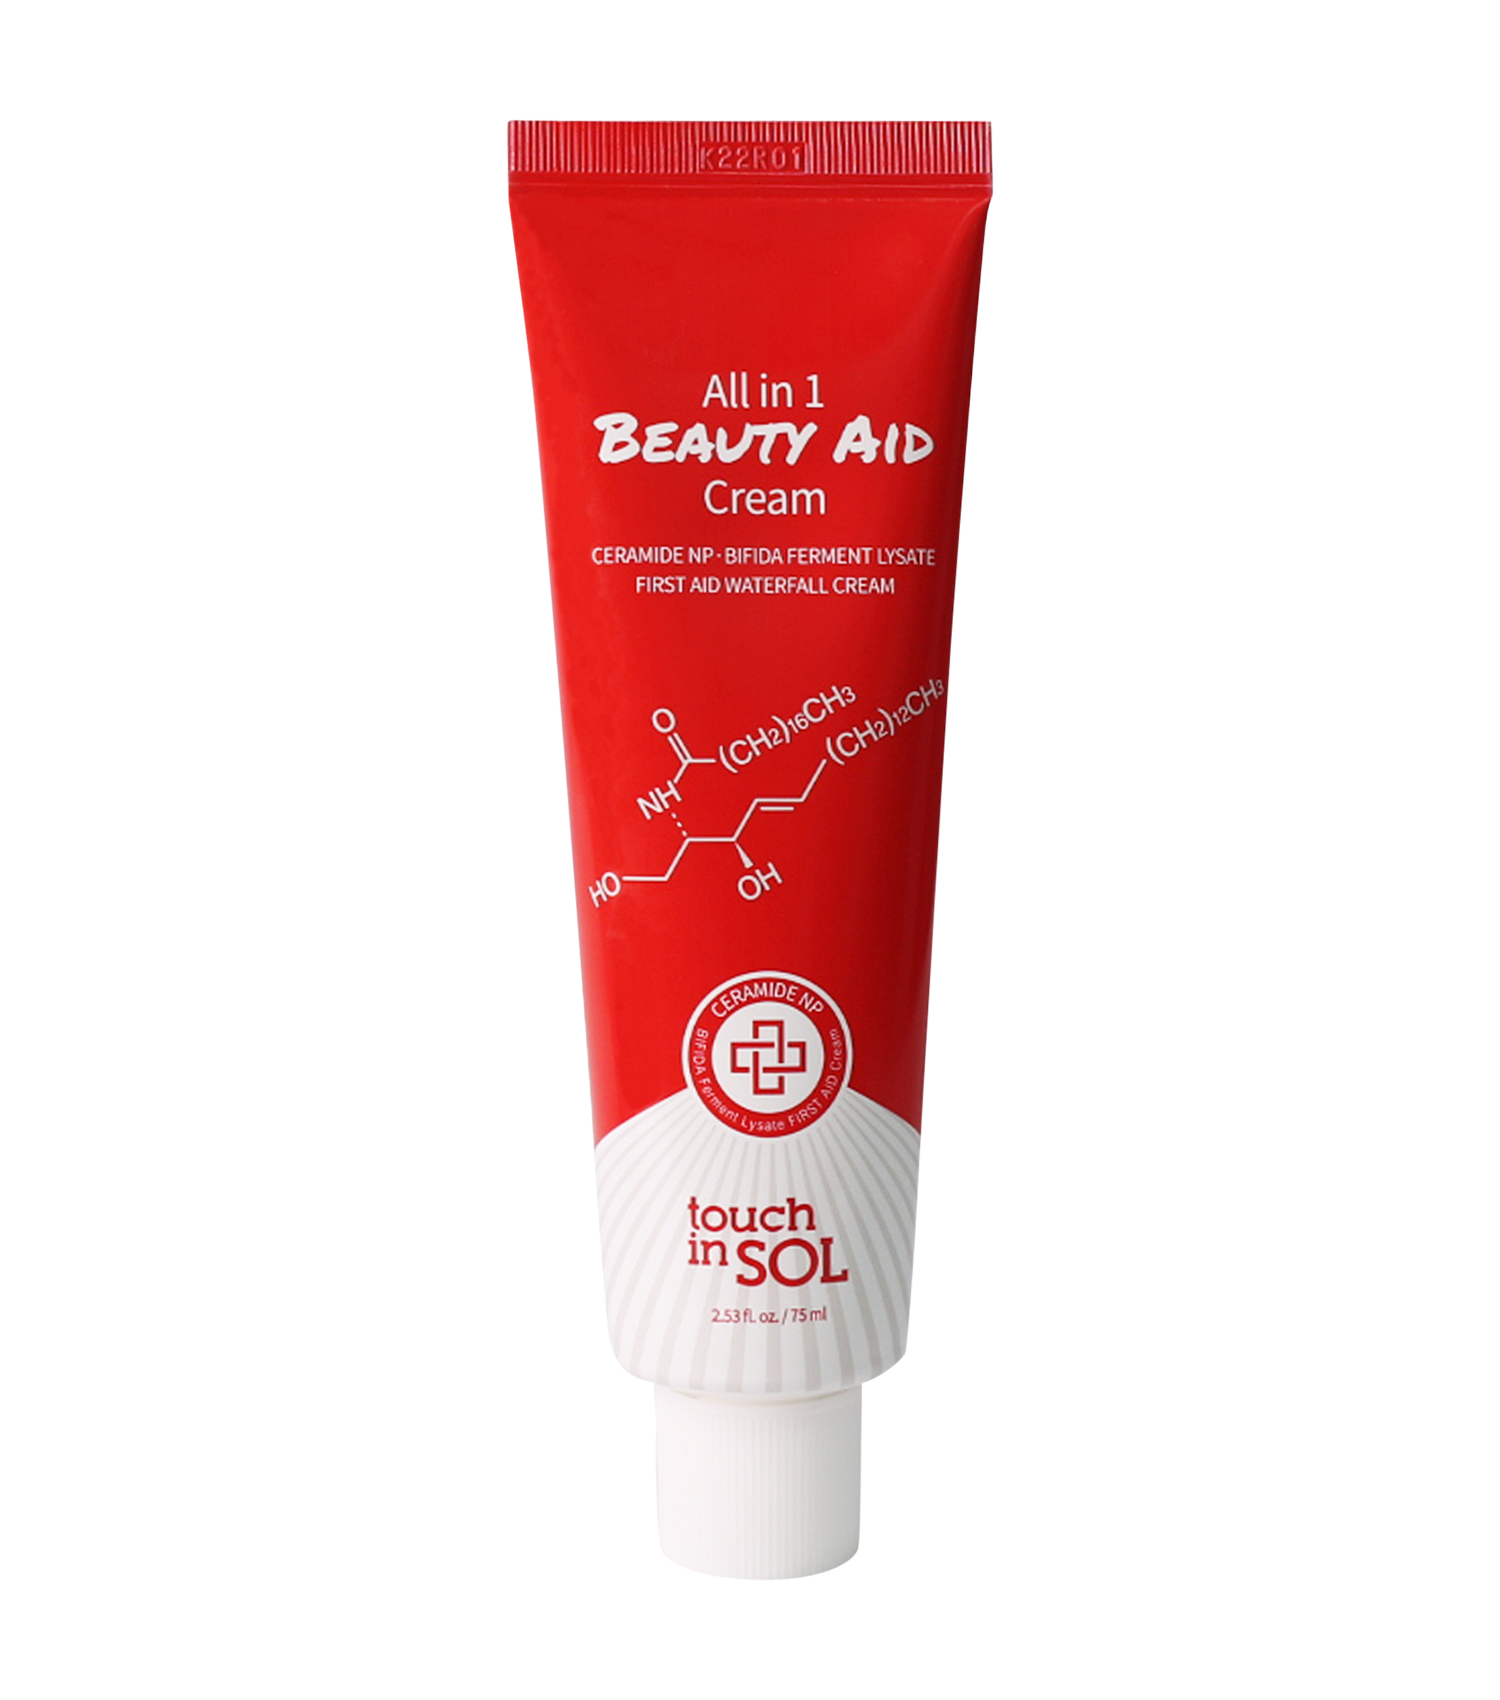 All in 1 Beauty Aid Cream